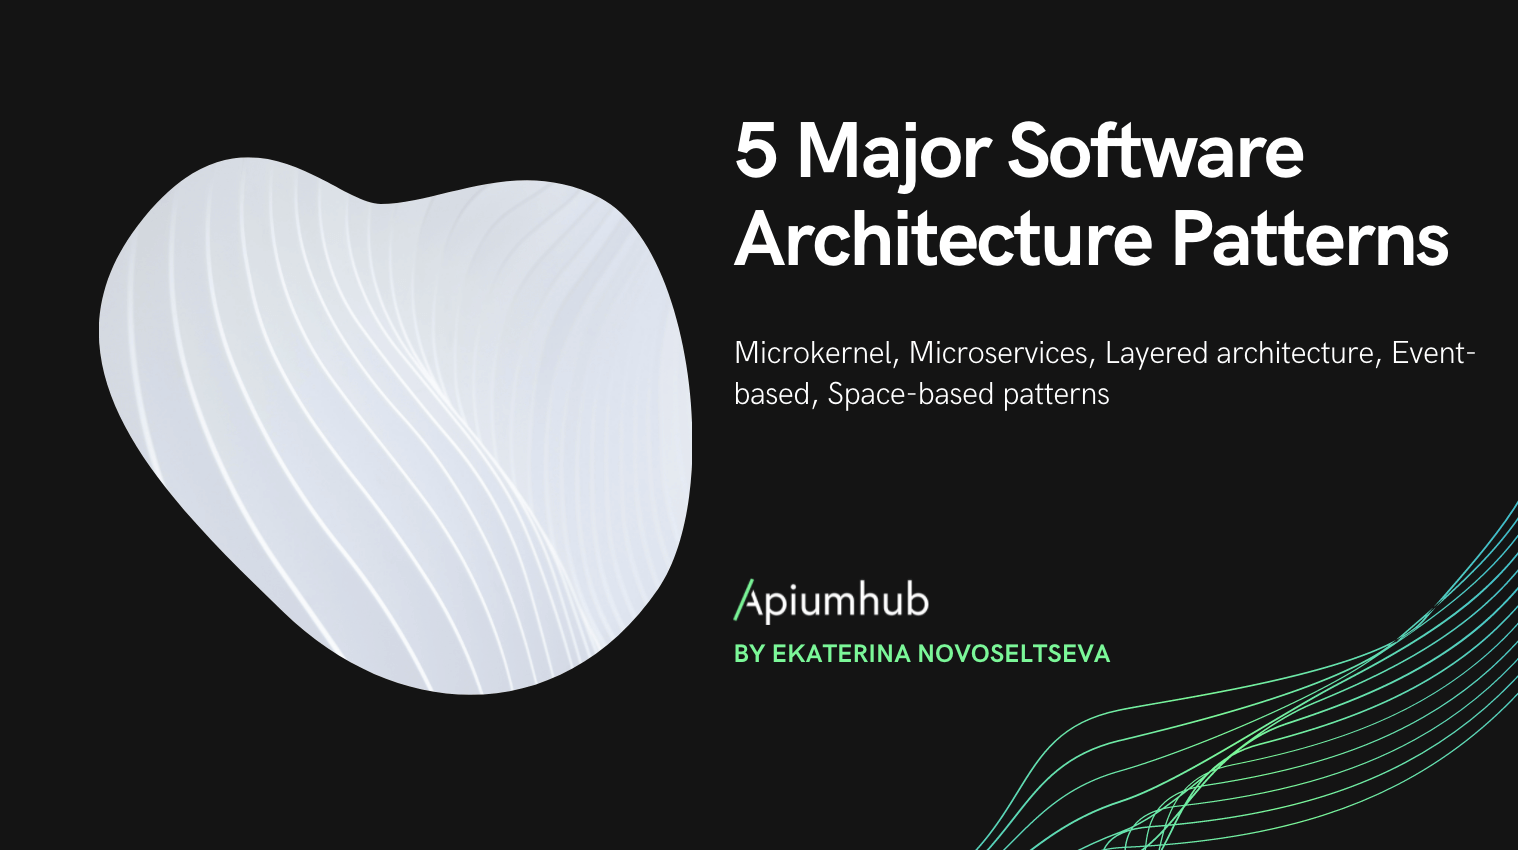 5 Major Software Architecture Patterns